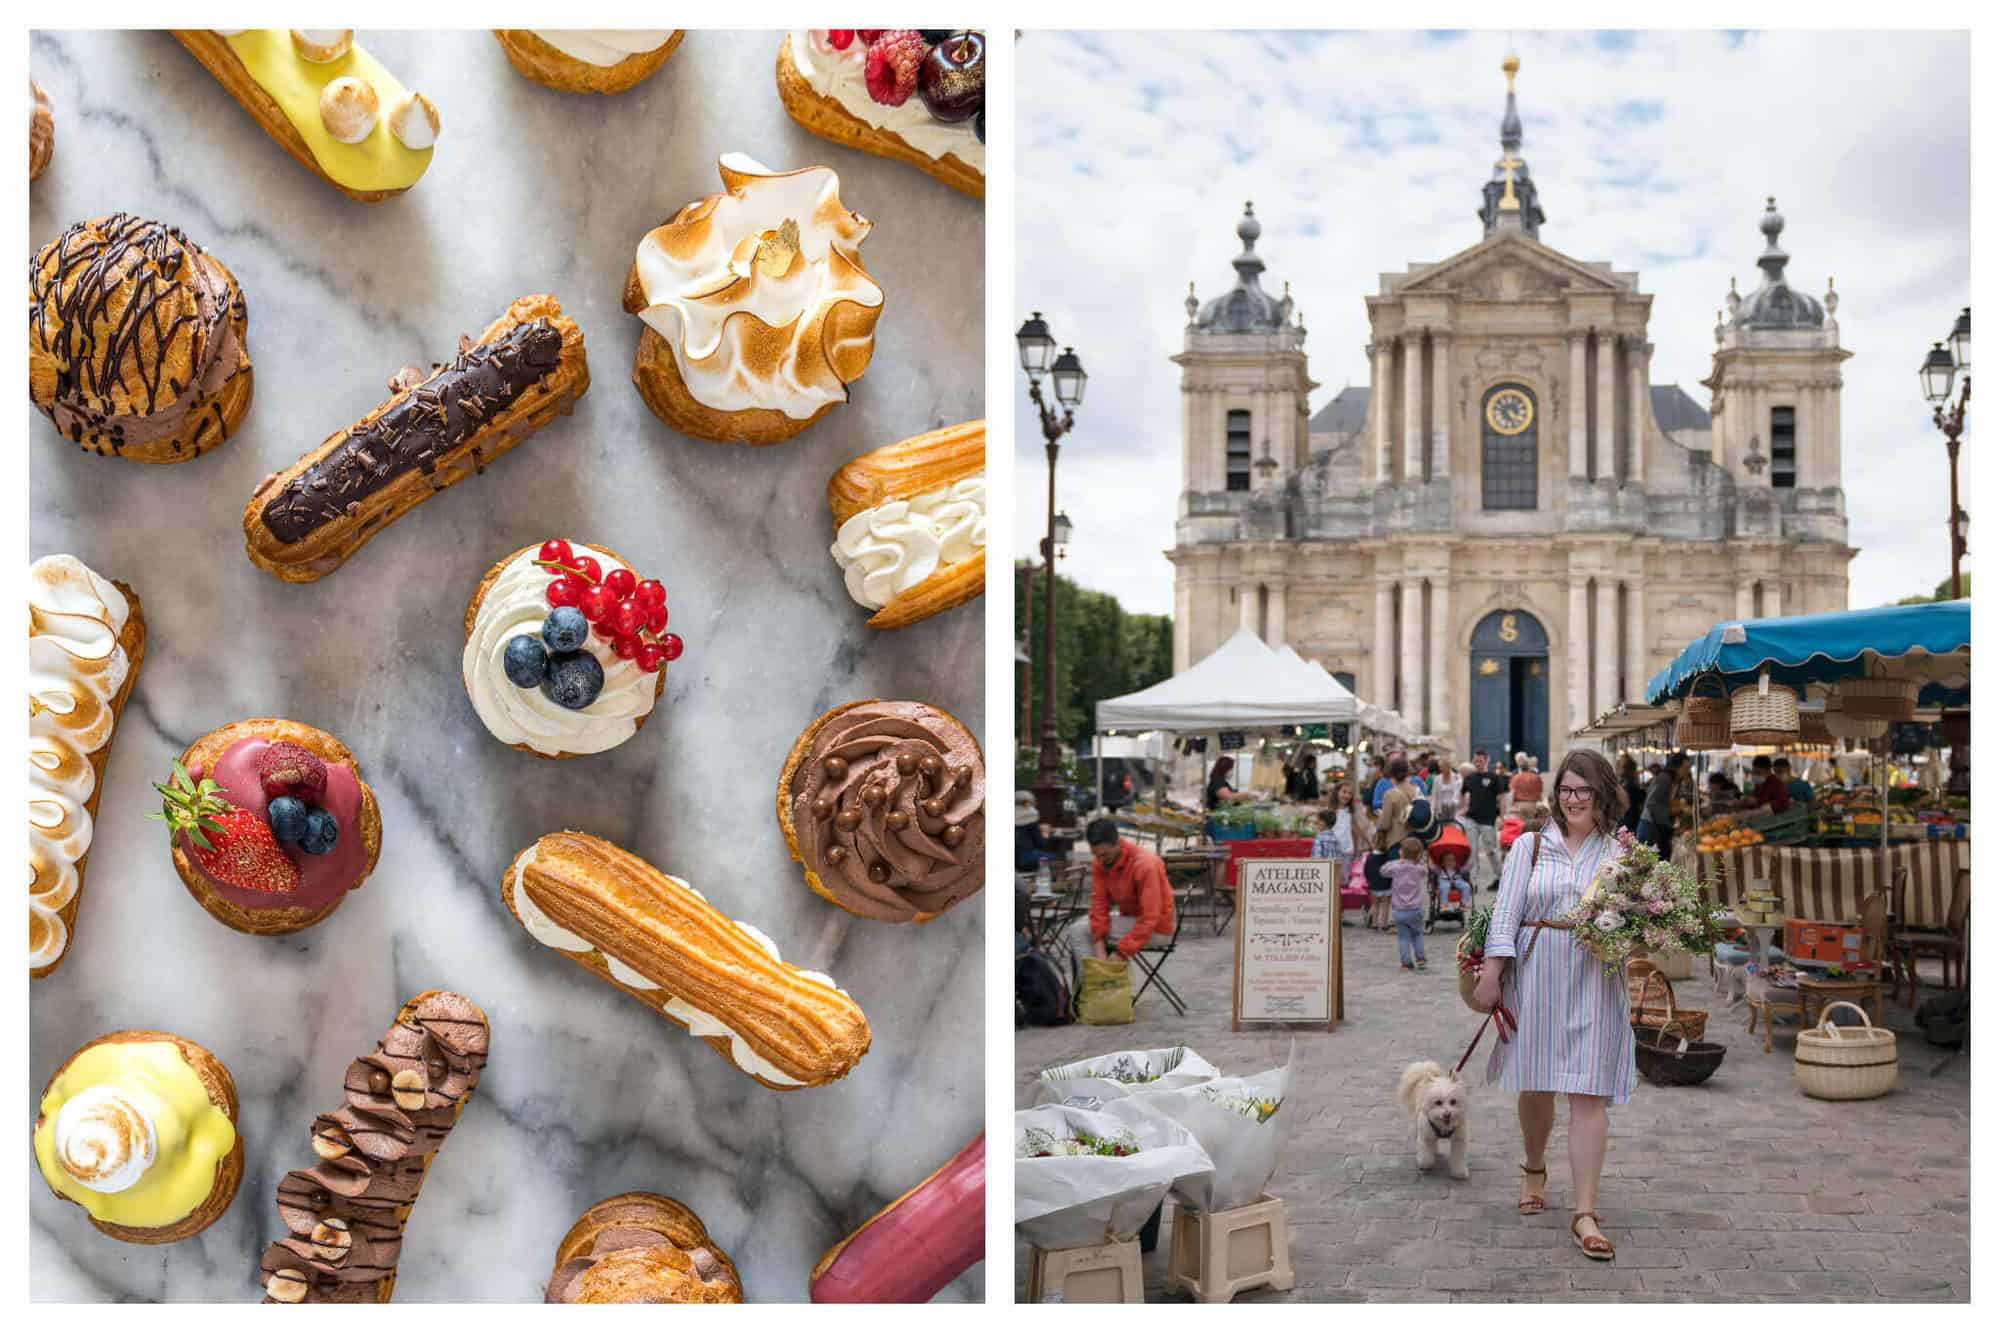 Left: a photo of an assortment of pasteries on a marble bench. Right: a photo of Molly Wilkinson walking her dog through a market in France.